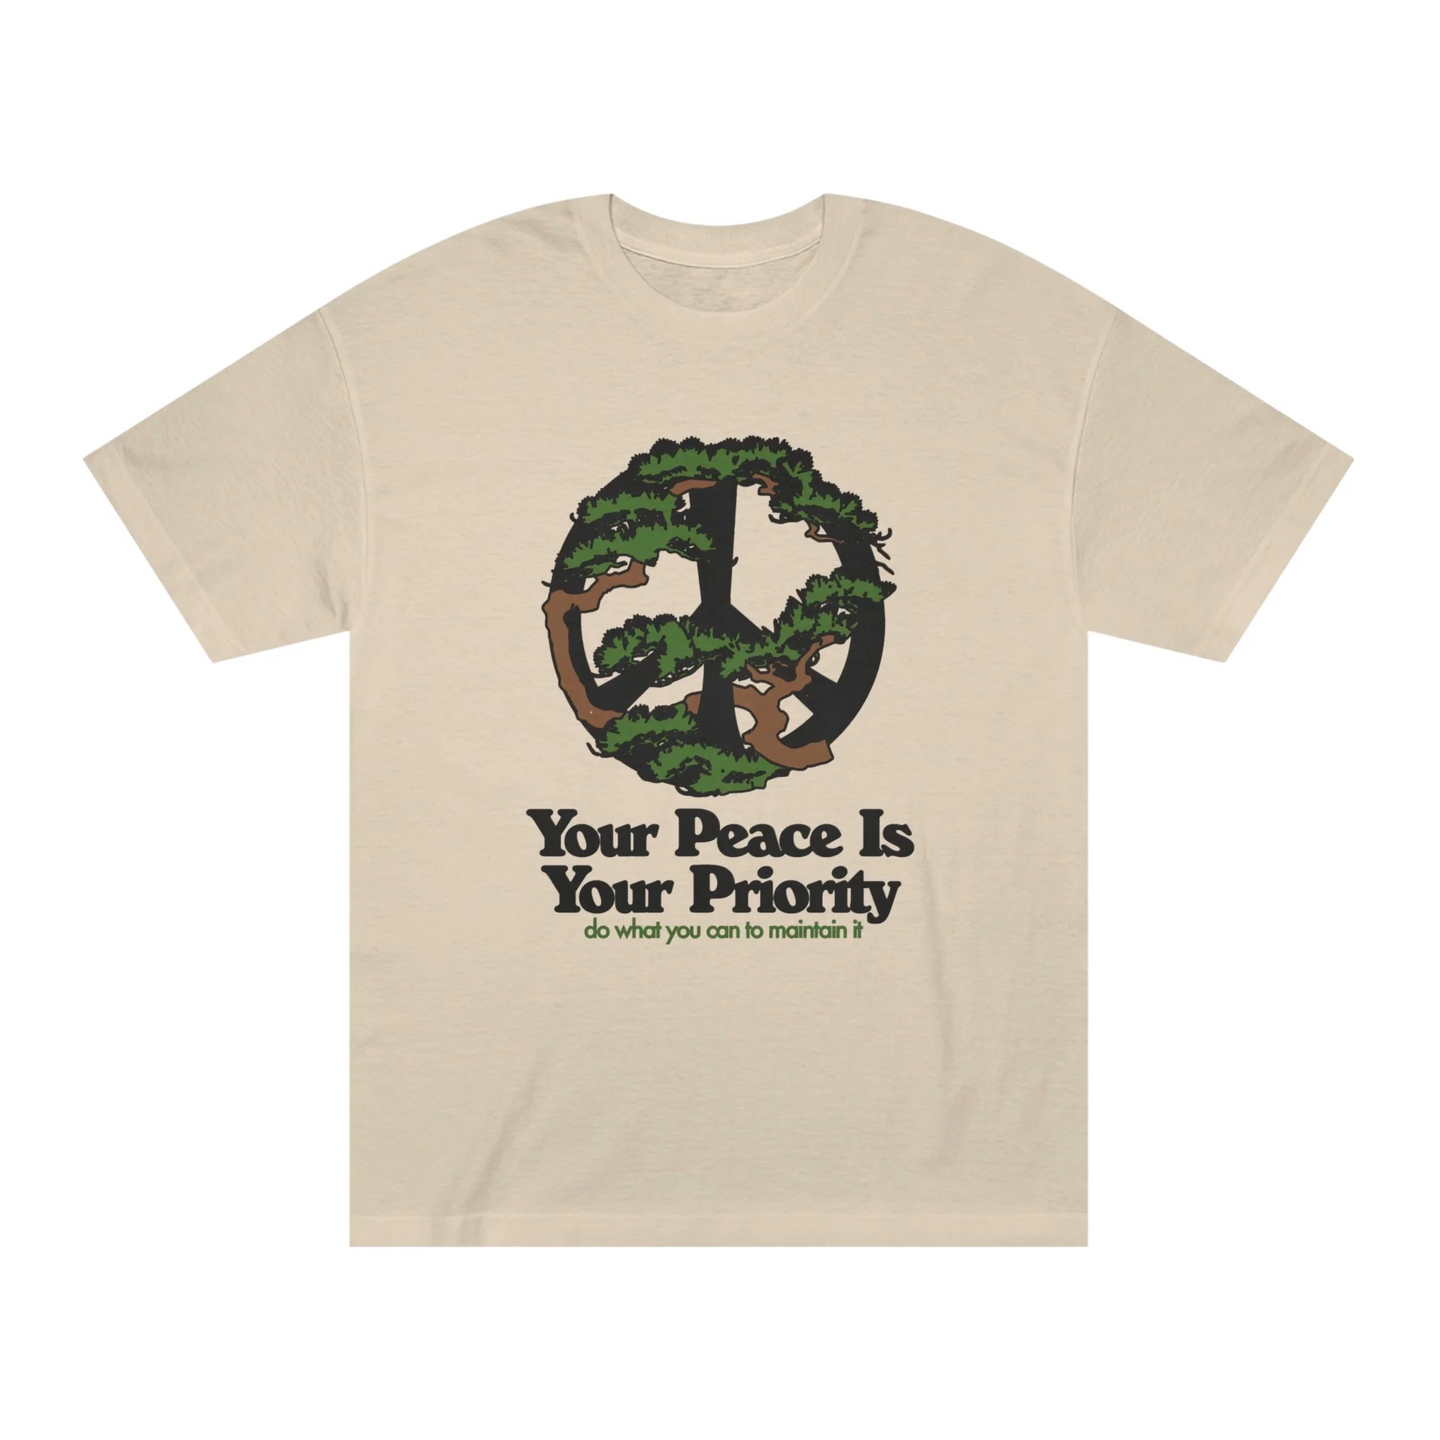 Your Peace Is Your Priority Tee